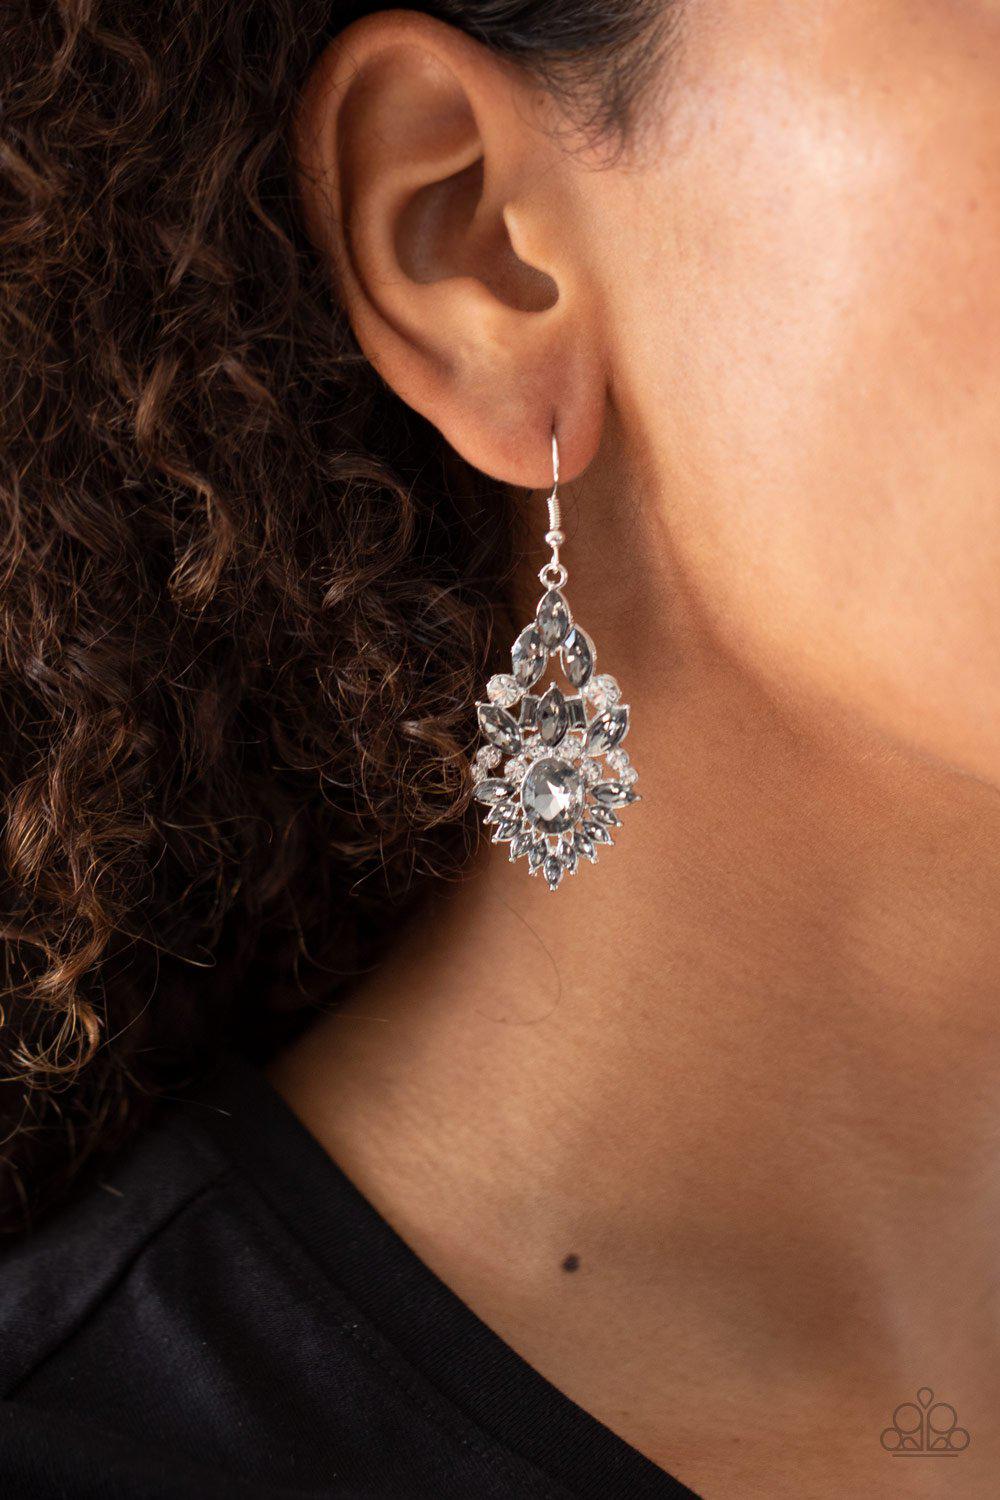 Ice Castle Couture Smoky Silver and White Rhinestone Earrings - Paparazzi Accessories-CarasShop.com - $5 Jewelry by Cara Jewels